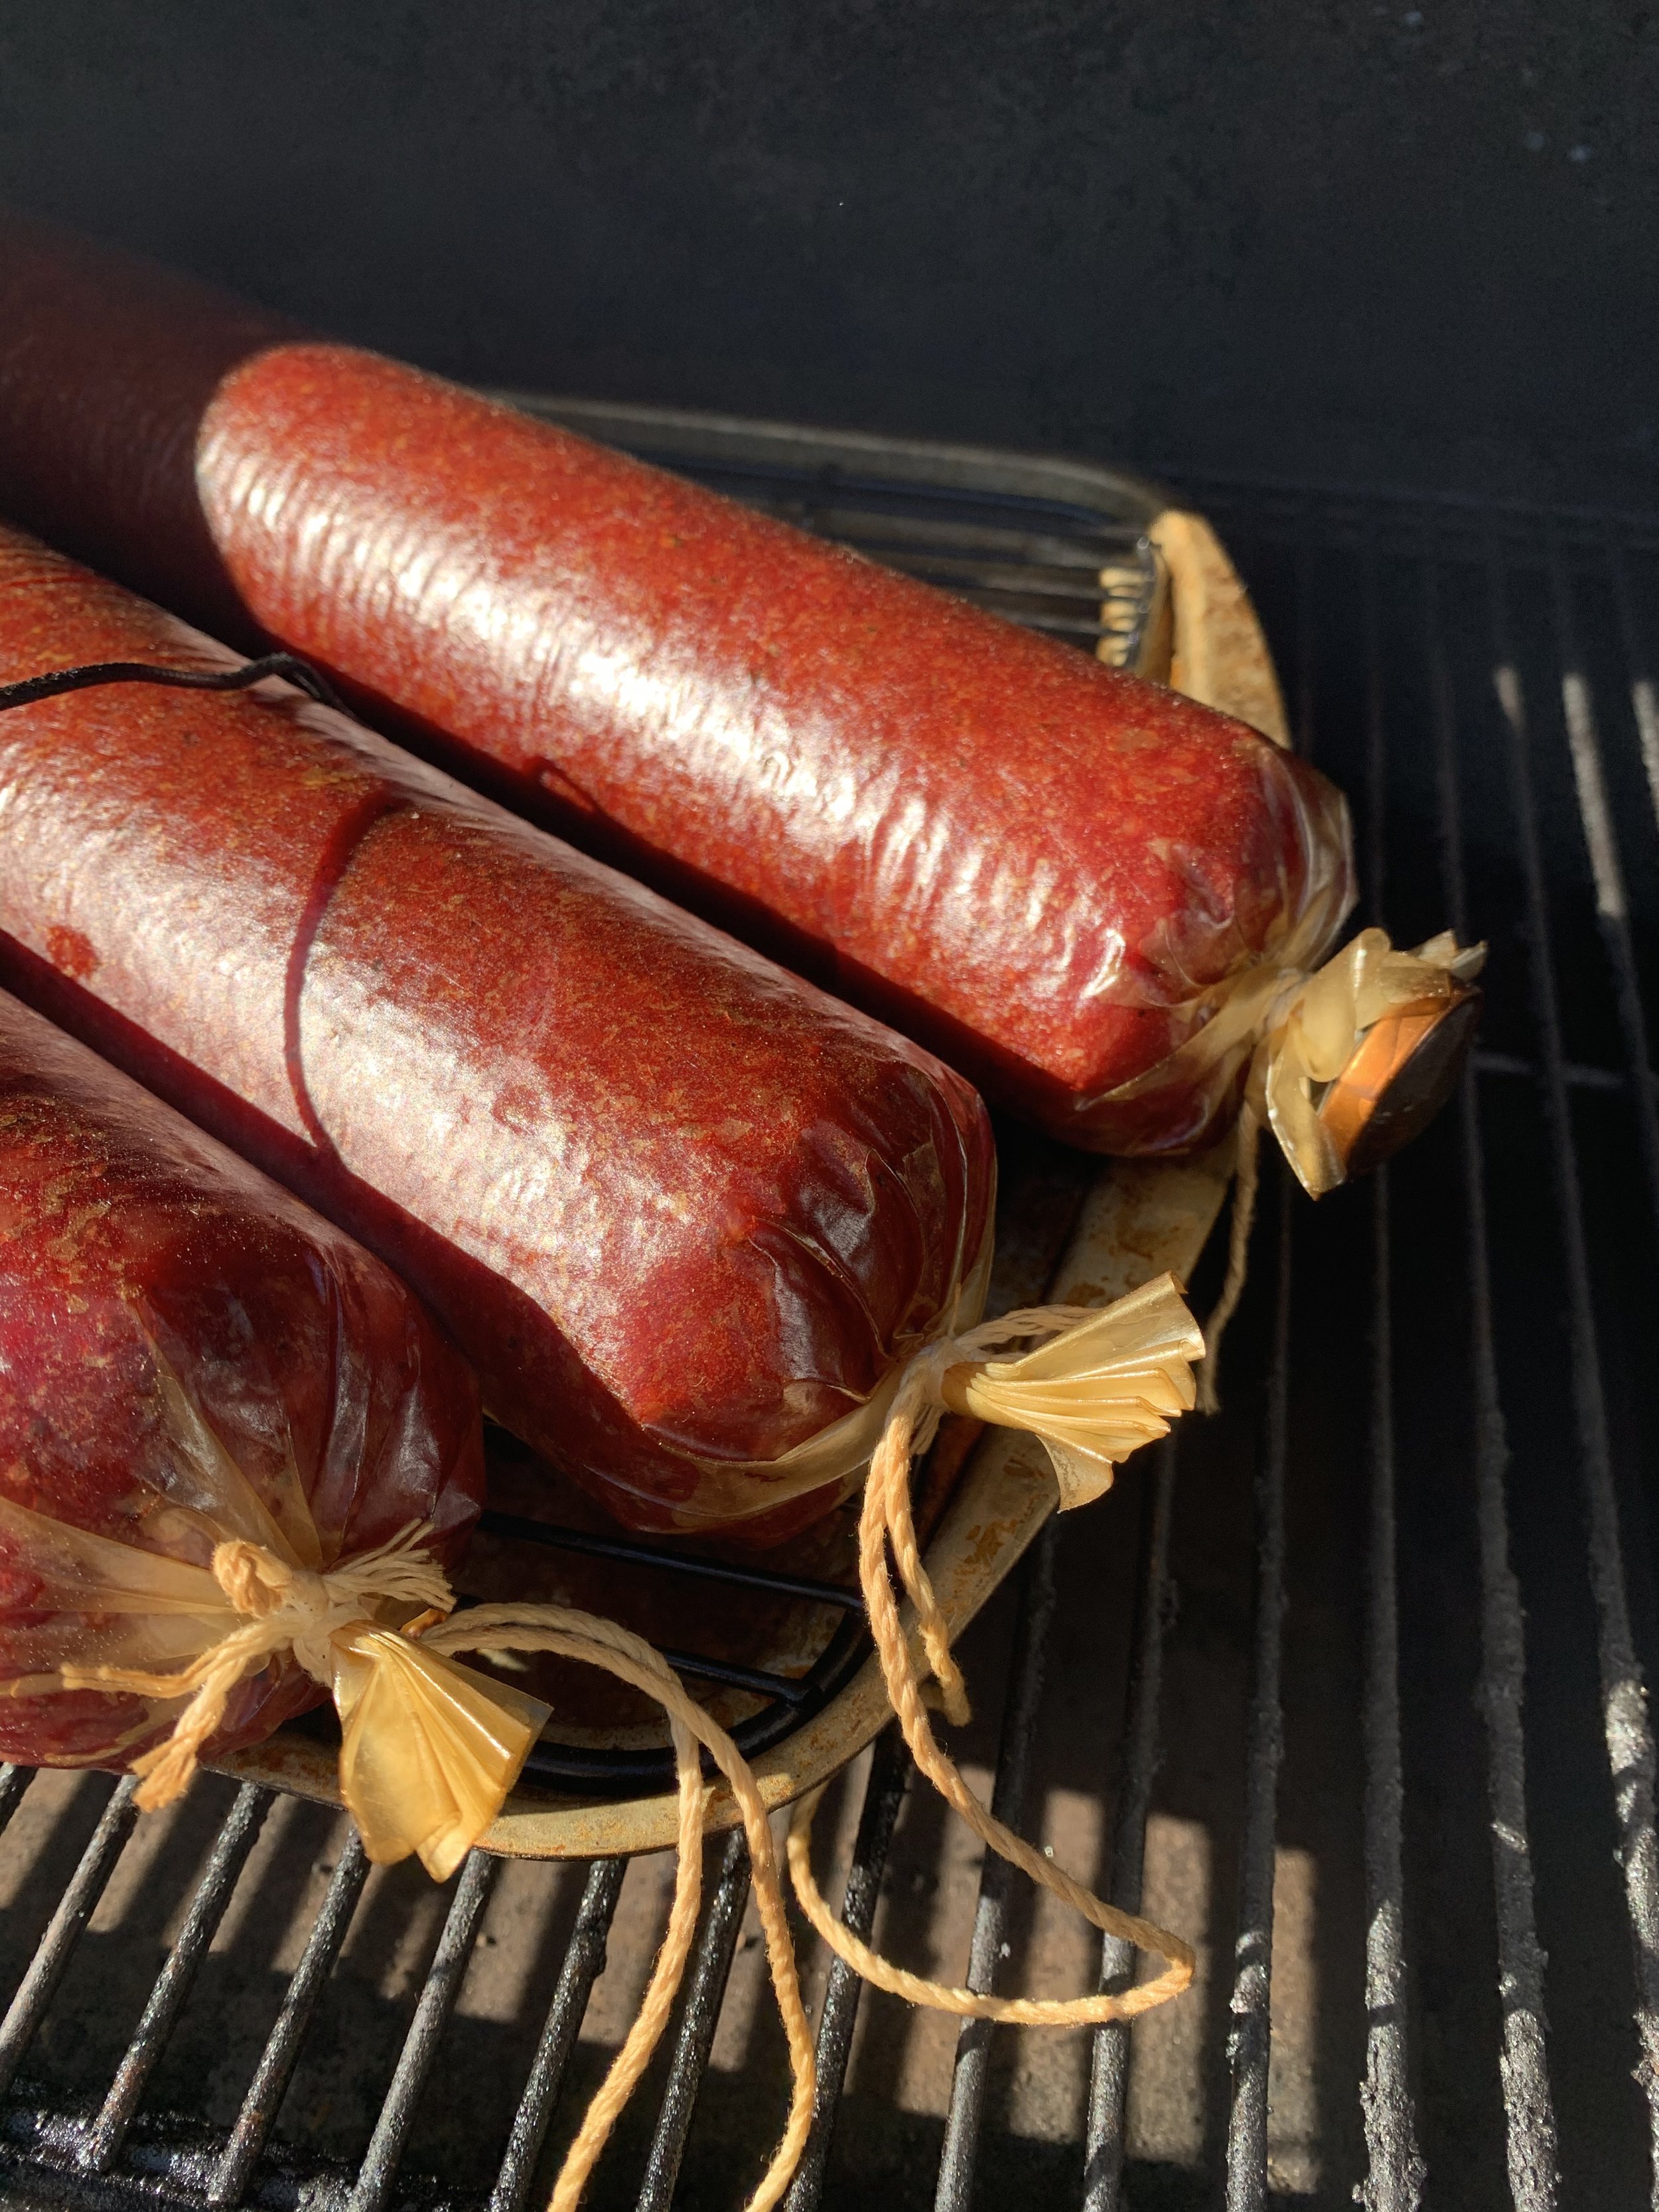 Internal cooking temperature for summer sausage and snack sticks